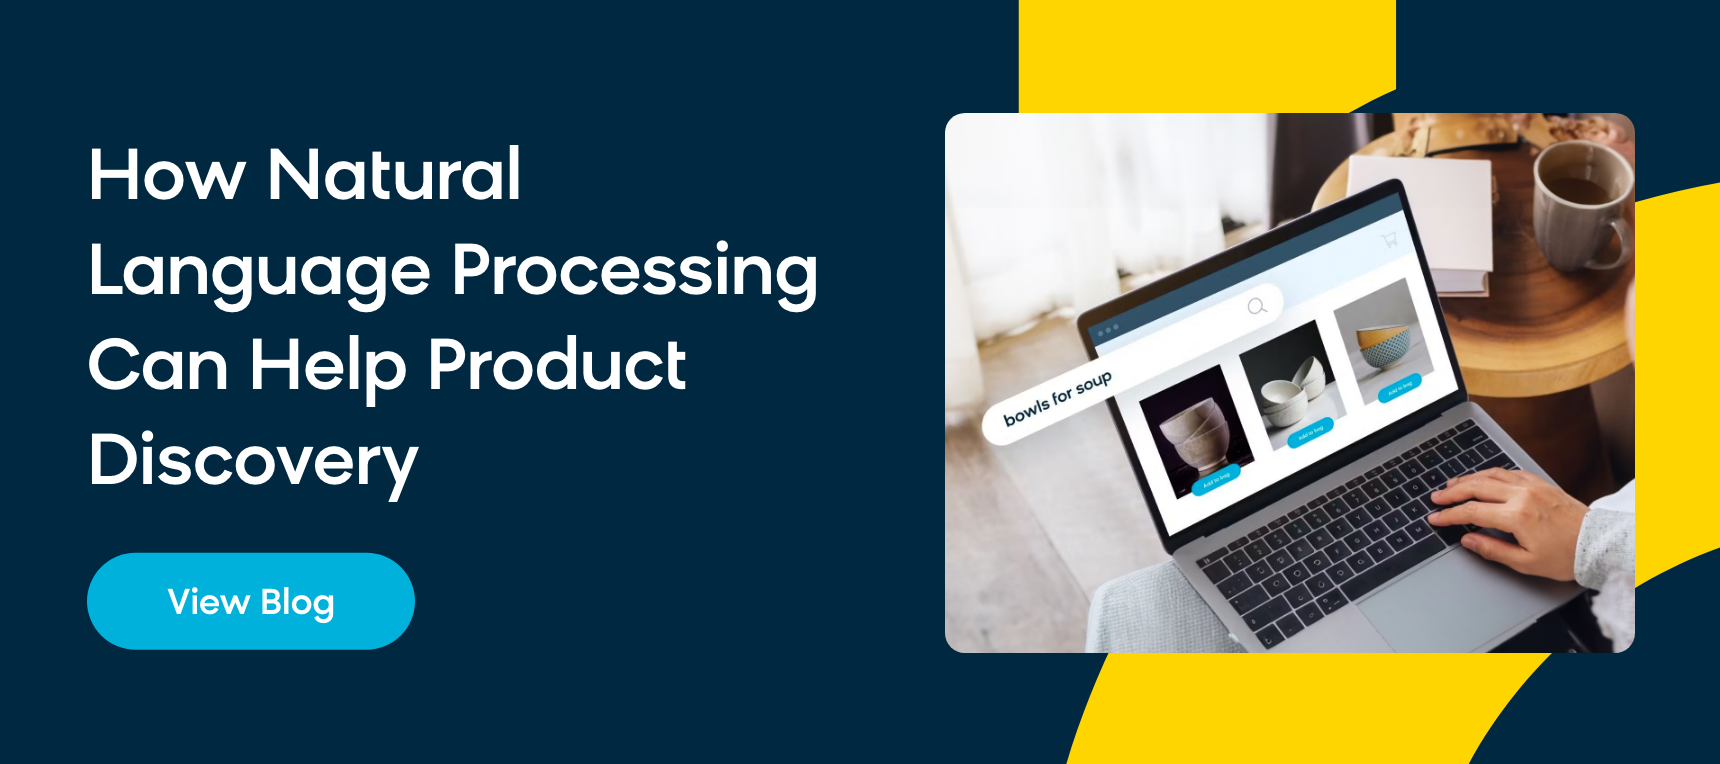 How Natural Language Processing Helps Product Discovery